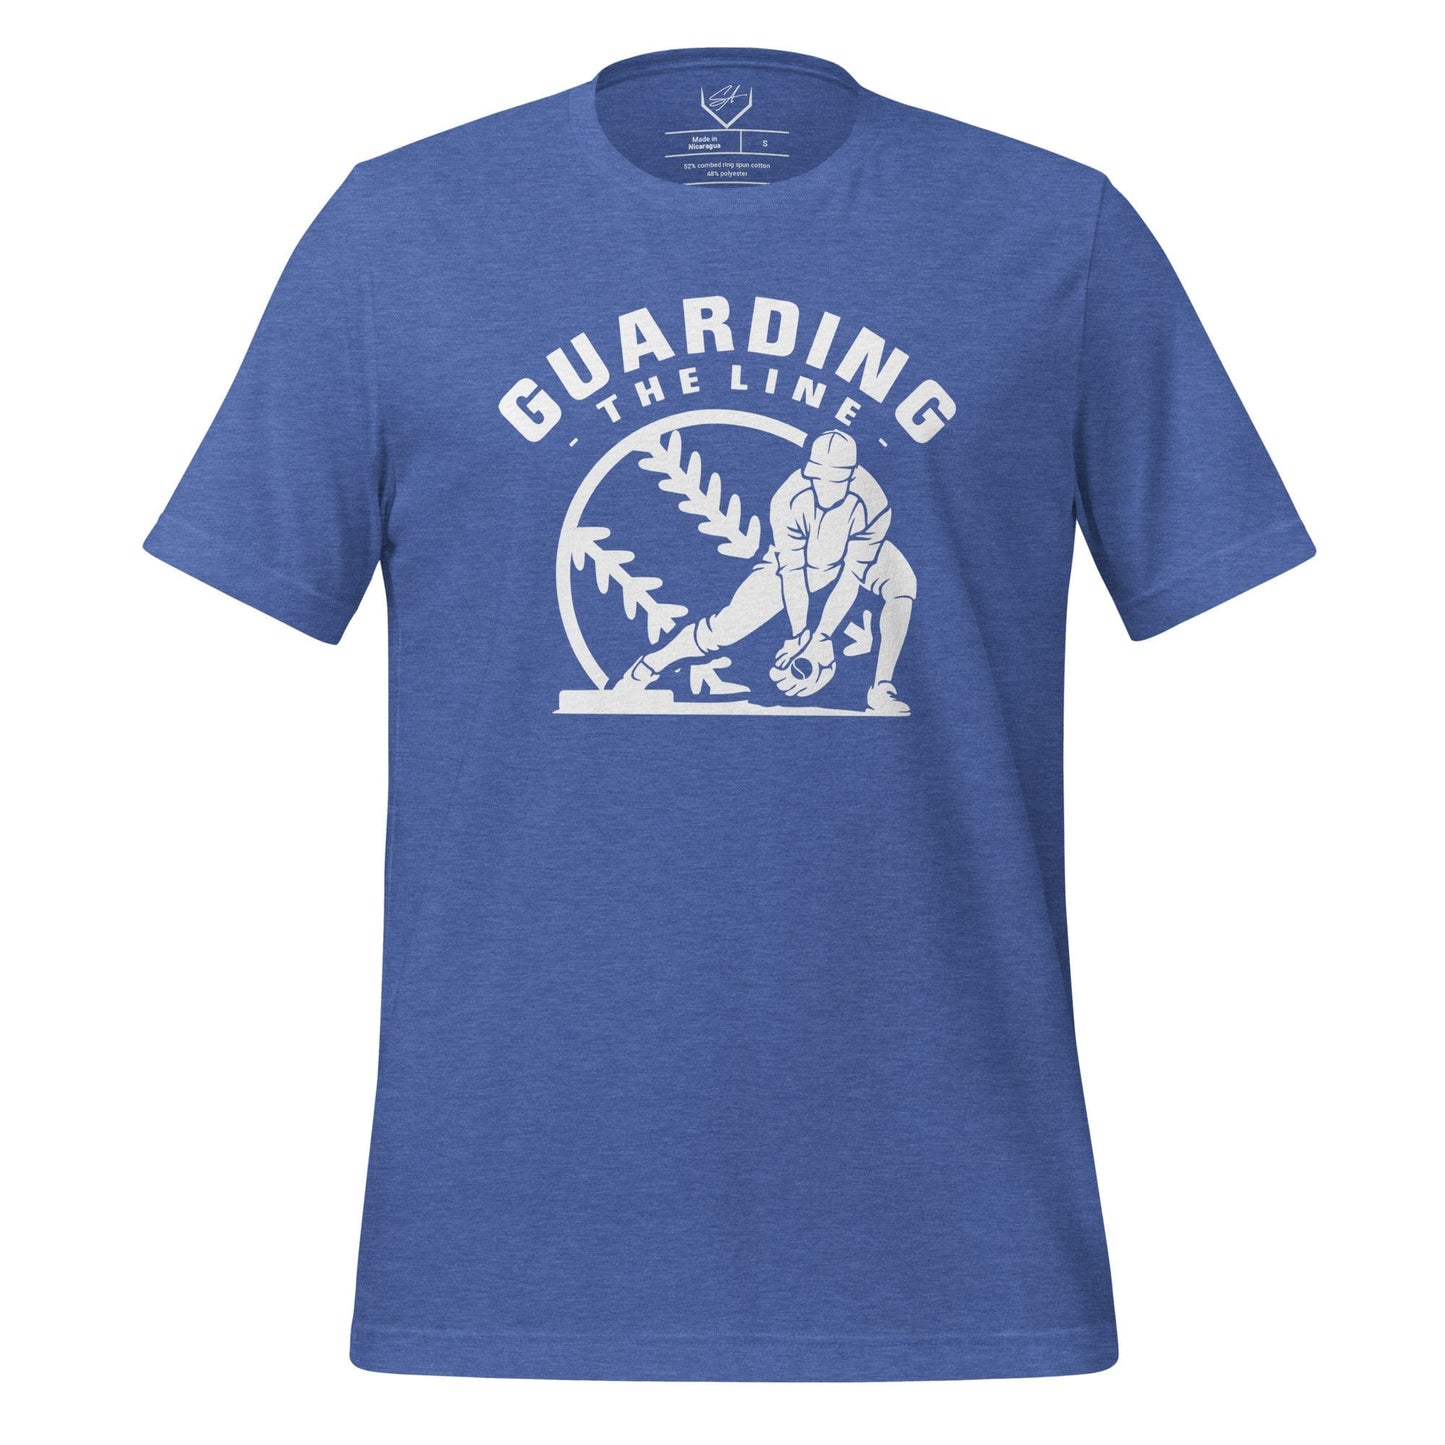 Guarding The Line - Adult Tee